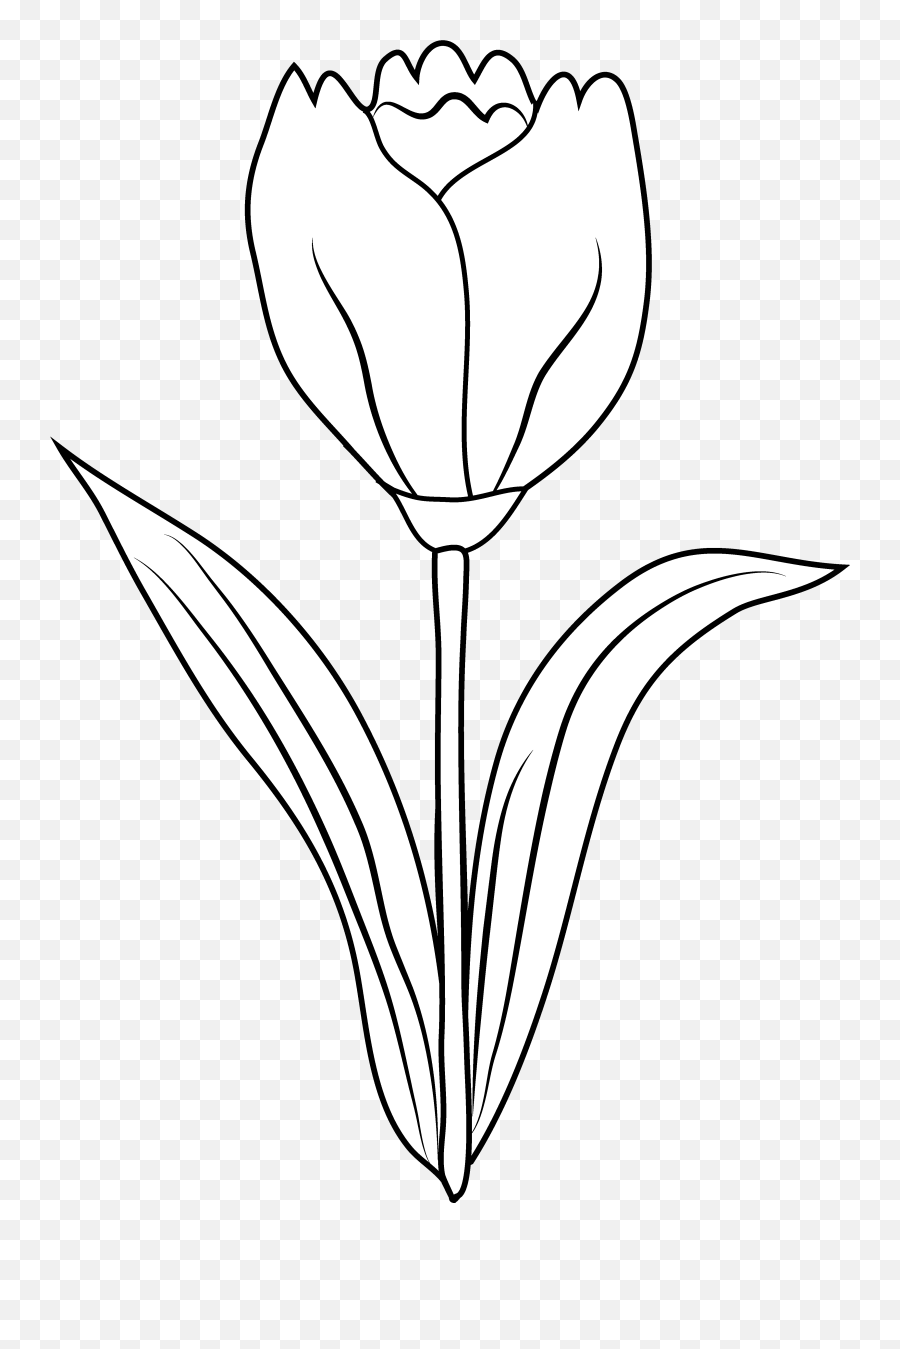 Tulips Png - Vector Free Library Tulip Clip Art Panda Free Clipart Tulip Flower Outline,Tulips Png